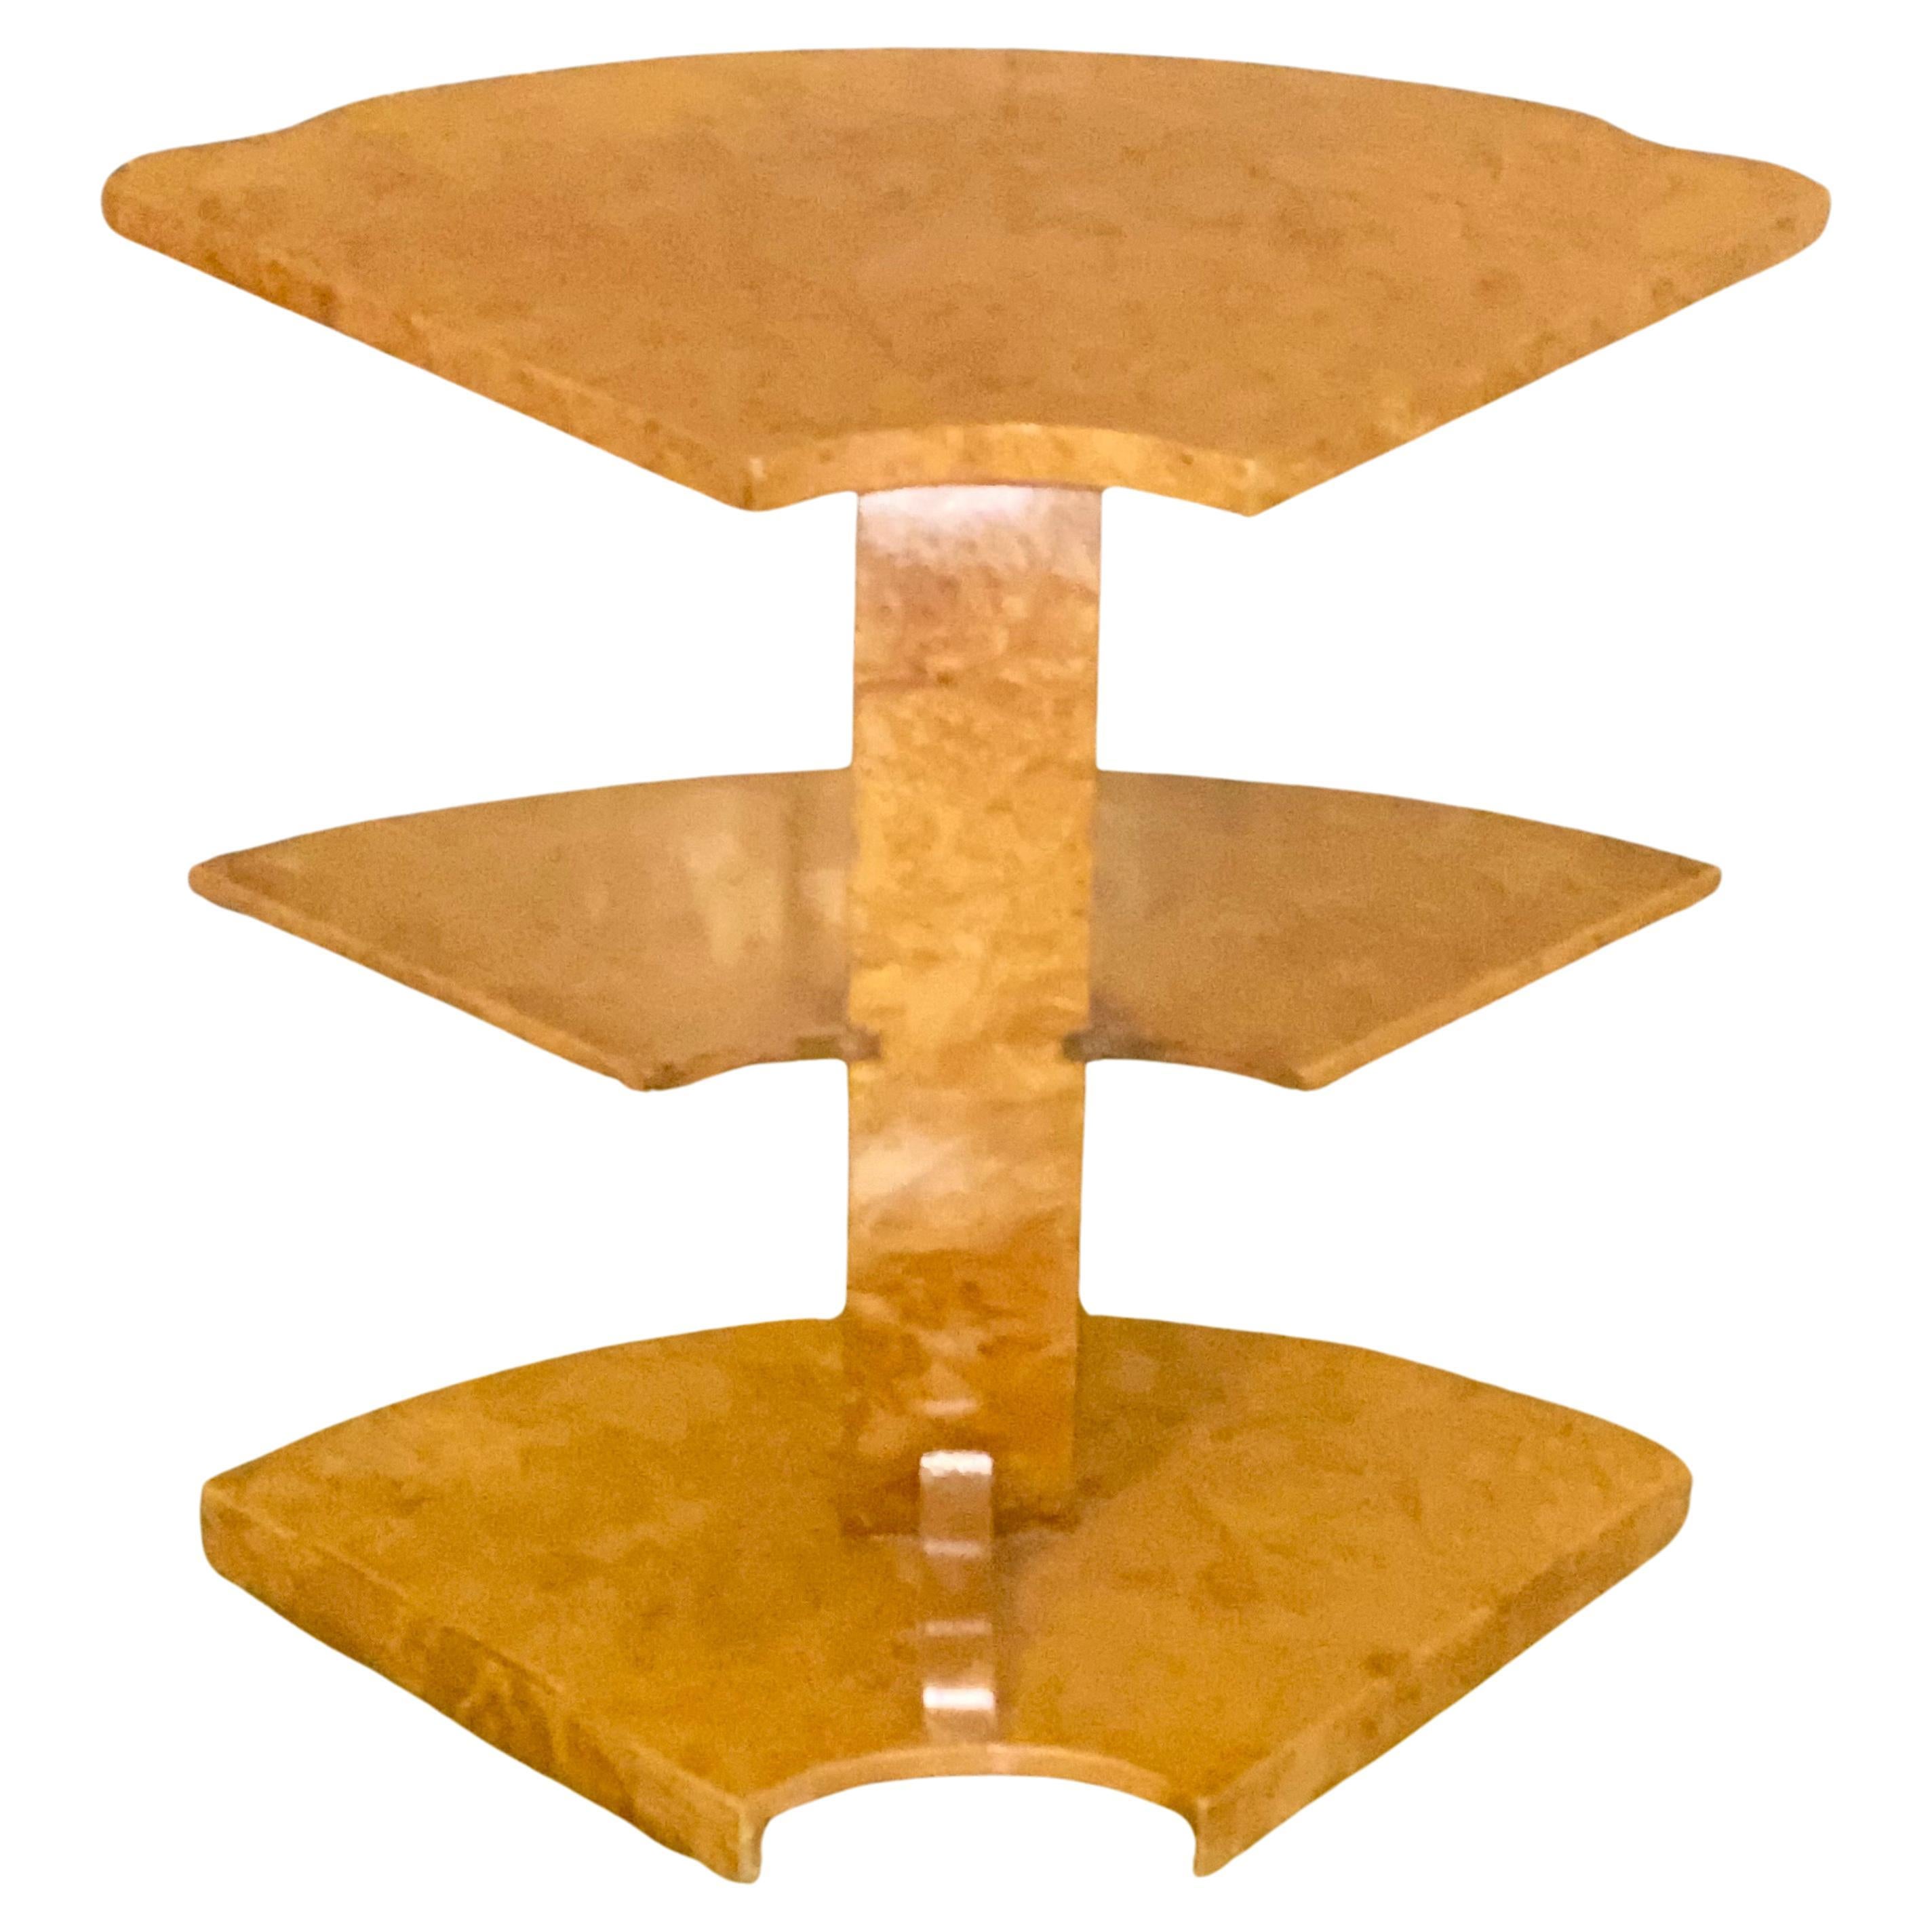 A Spectacular Art Deco Blonde Burr Maple H&L Epstein Nest of Tables Circa 1930's For Sale 4